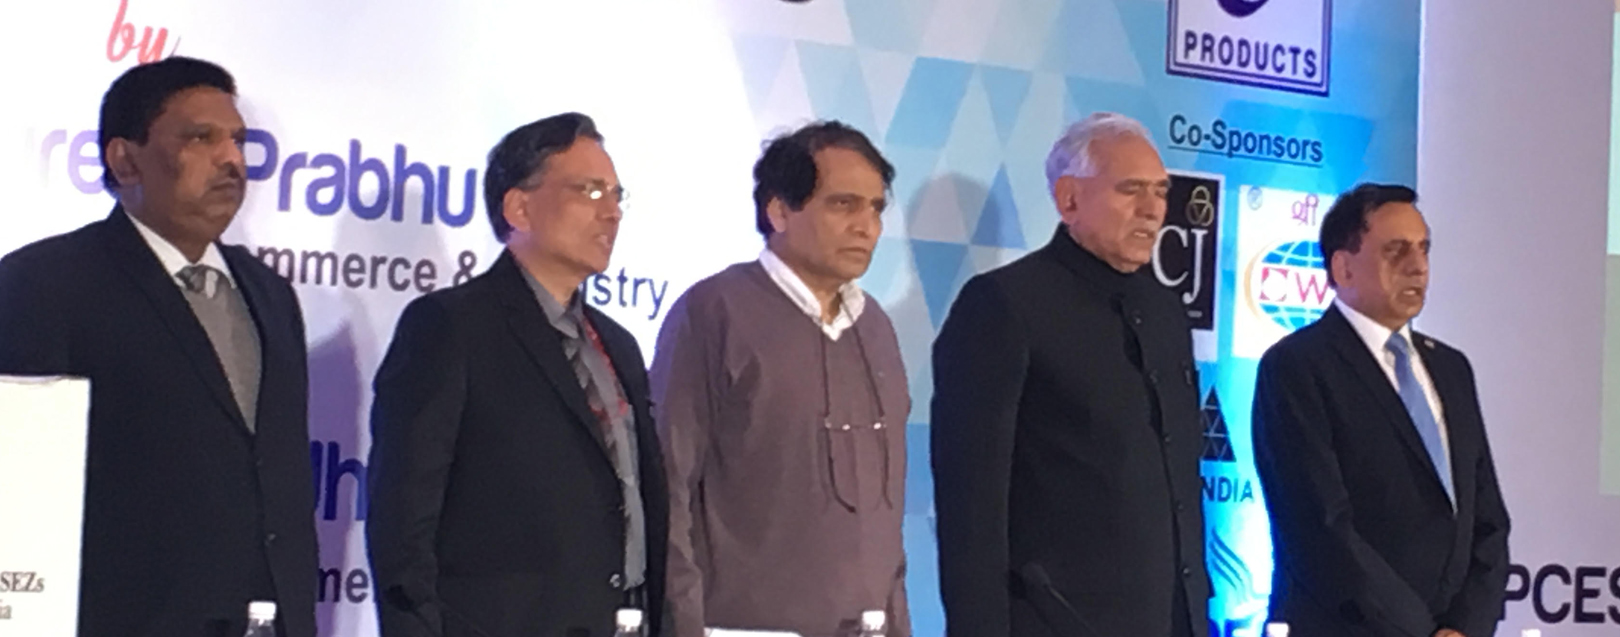 Conducting inter-departmental discussions to address SEZ's woes: Prabhu